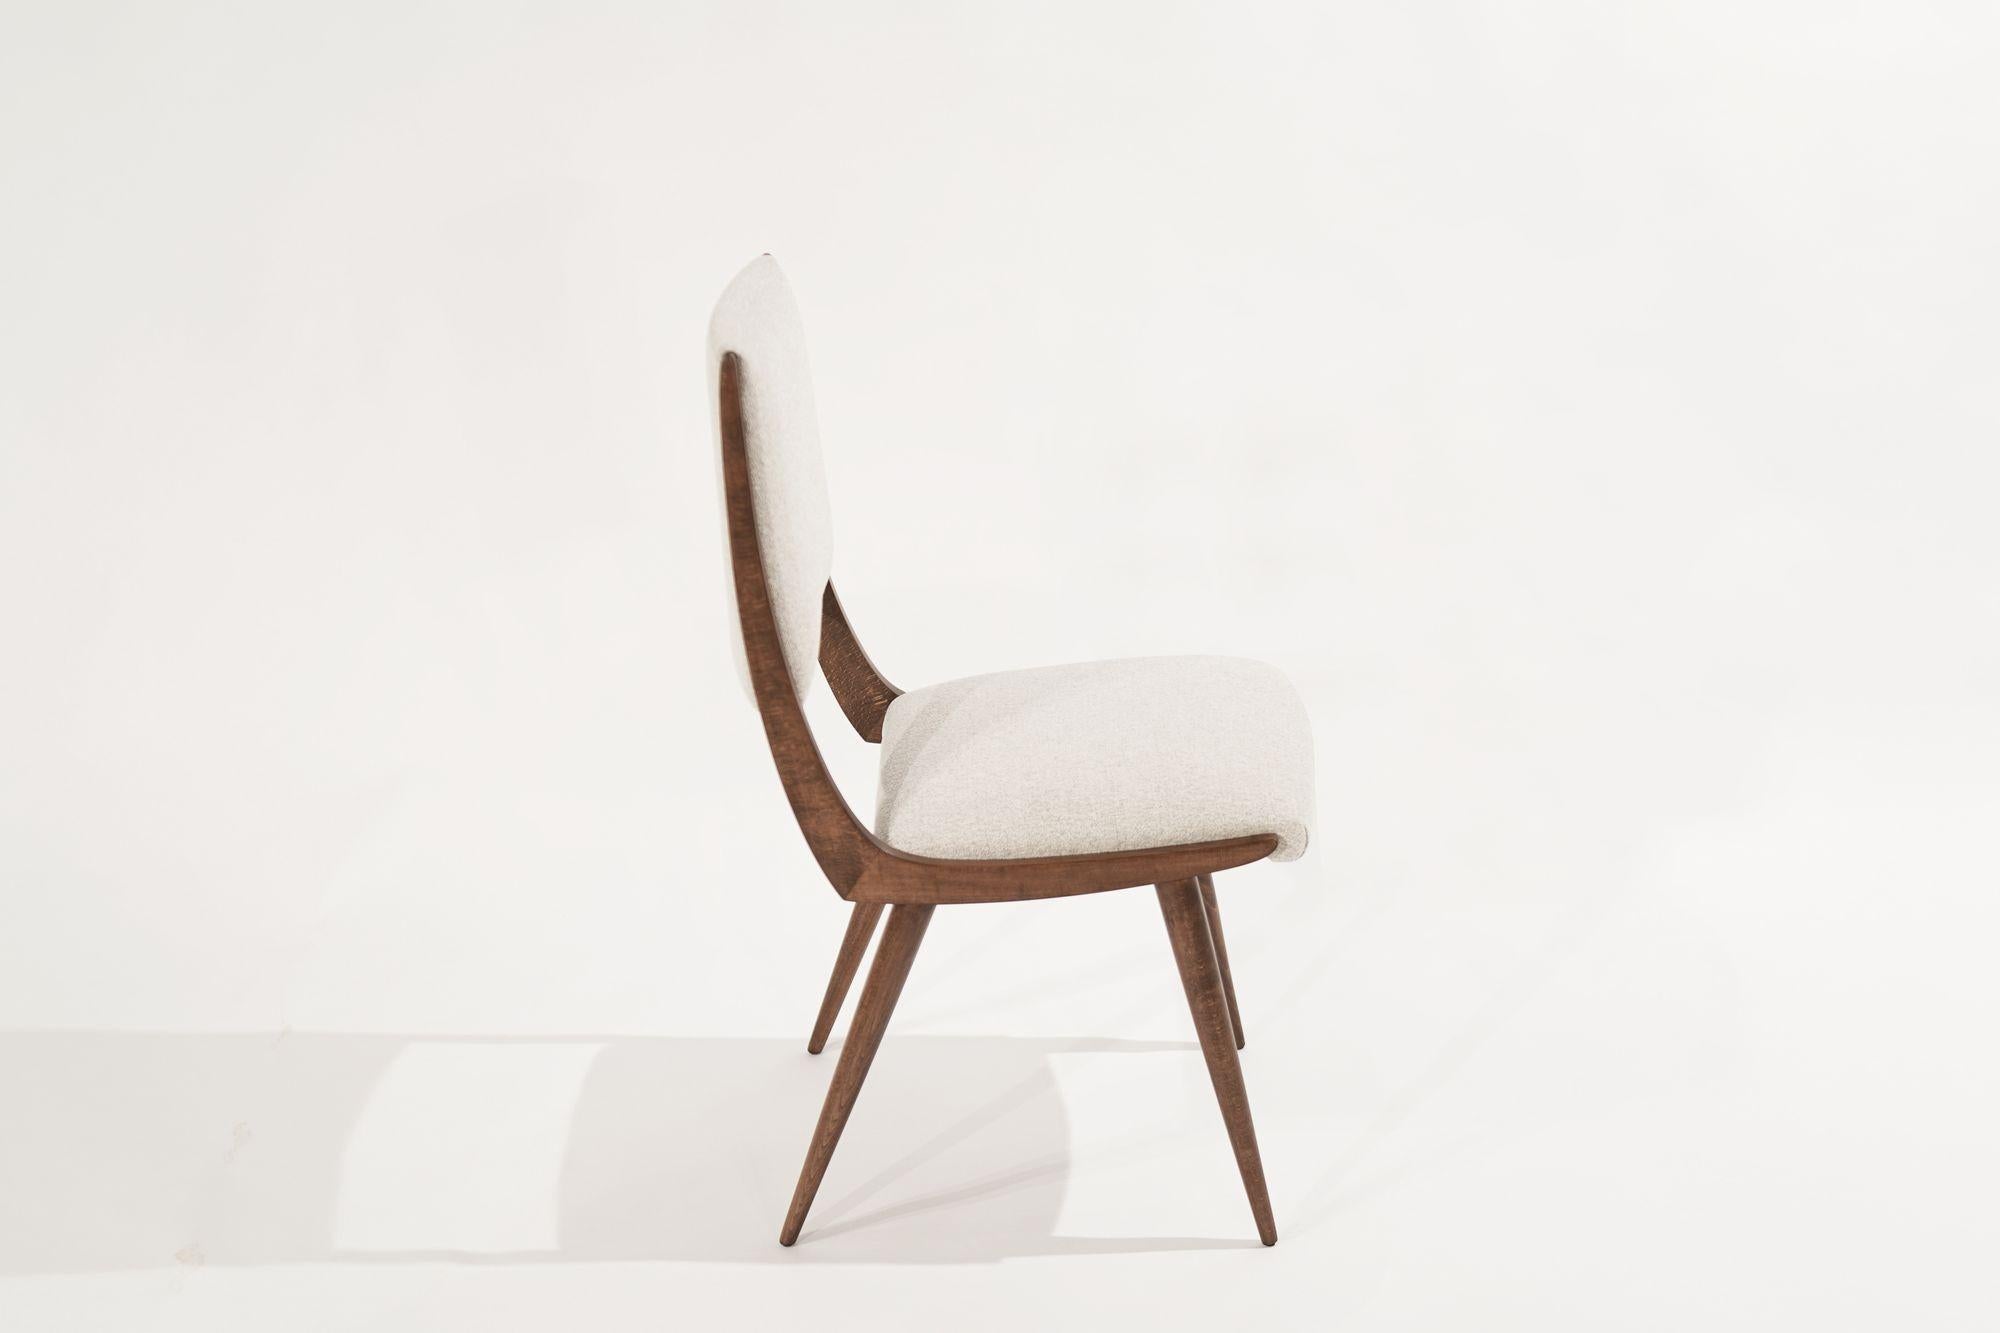 Introducing our Exquisite Parisiano Chair, inspired by the iconic designs of Ico Parisi. Crafted with meticulous attention to detail, this chair combines timeless elegance with modern functionality. Made from premium walnut, it exudes a warm and